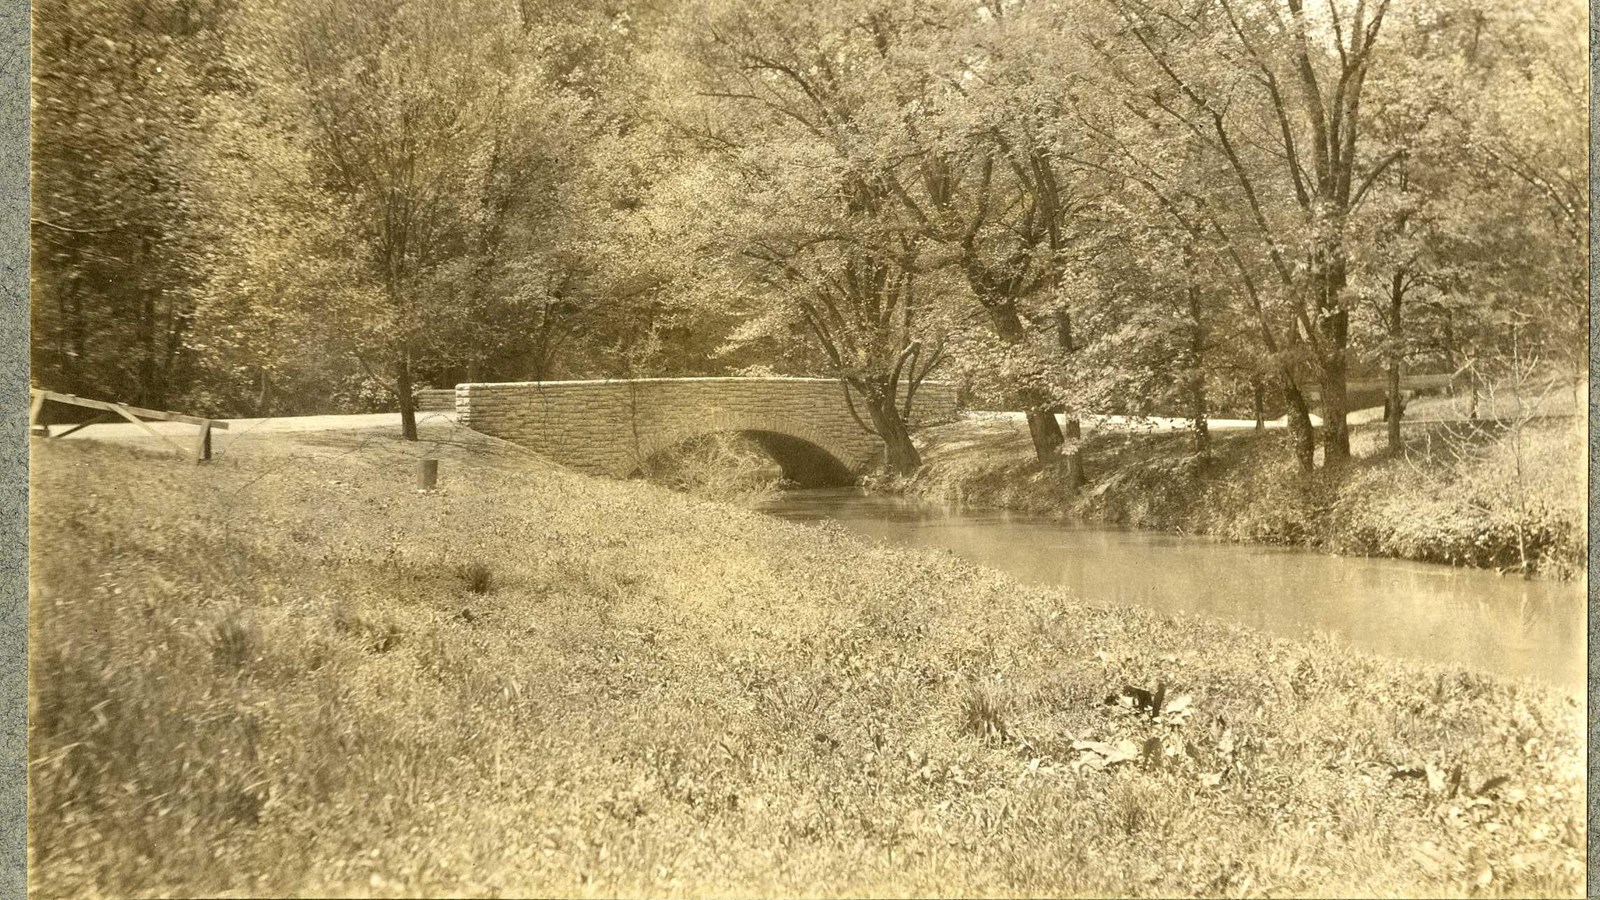 Black and white of grassy area with stone bridge over water with trees by the water